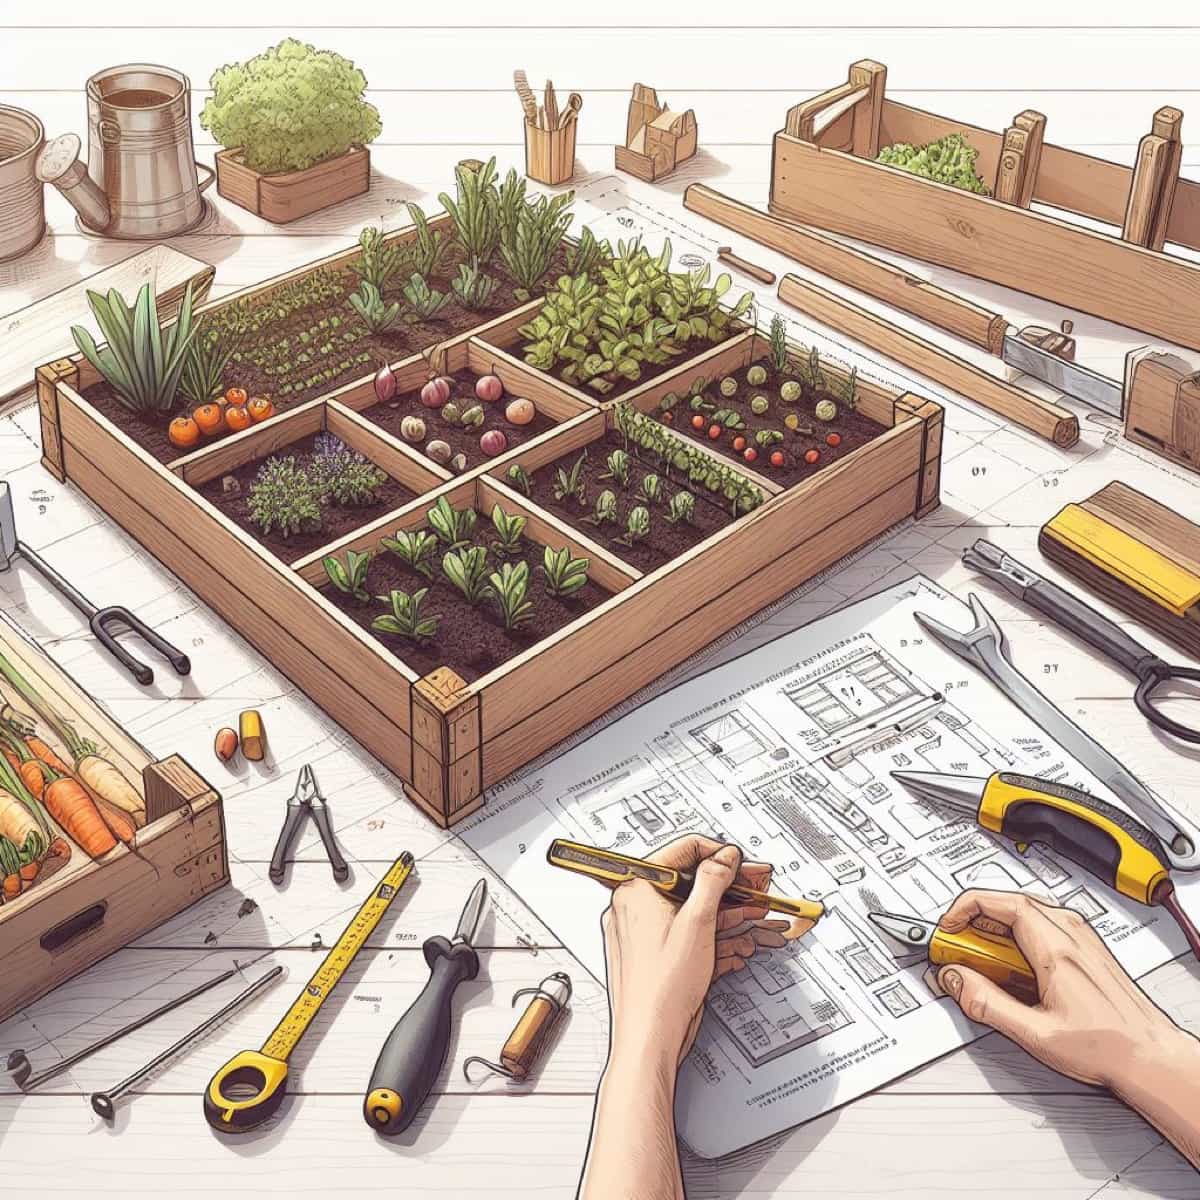 How to Build Vegetable Garden Boxes